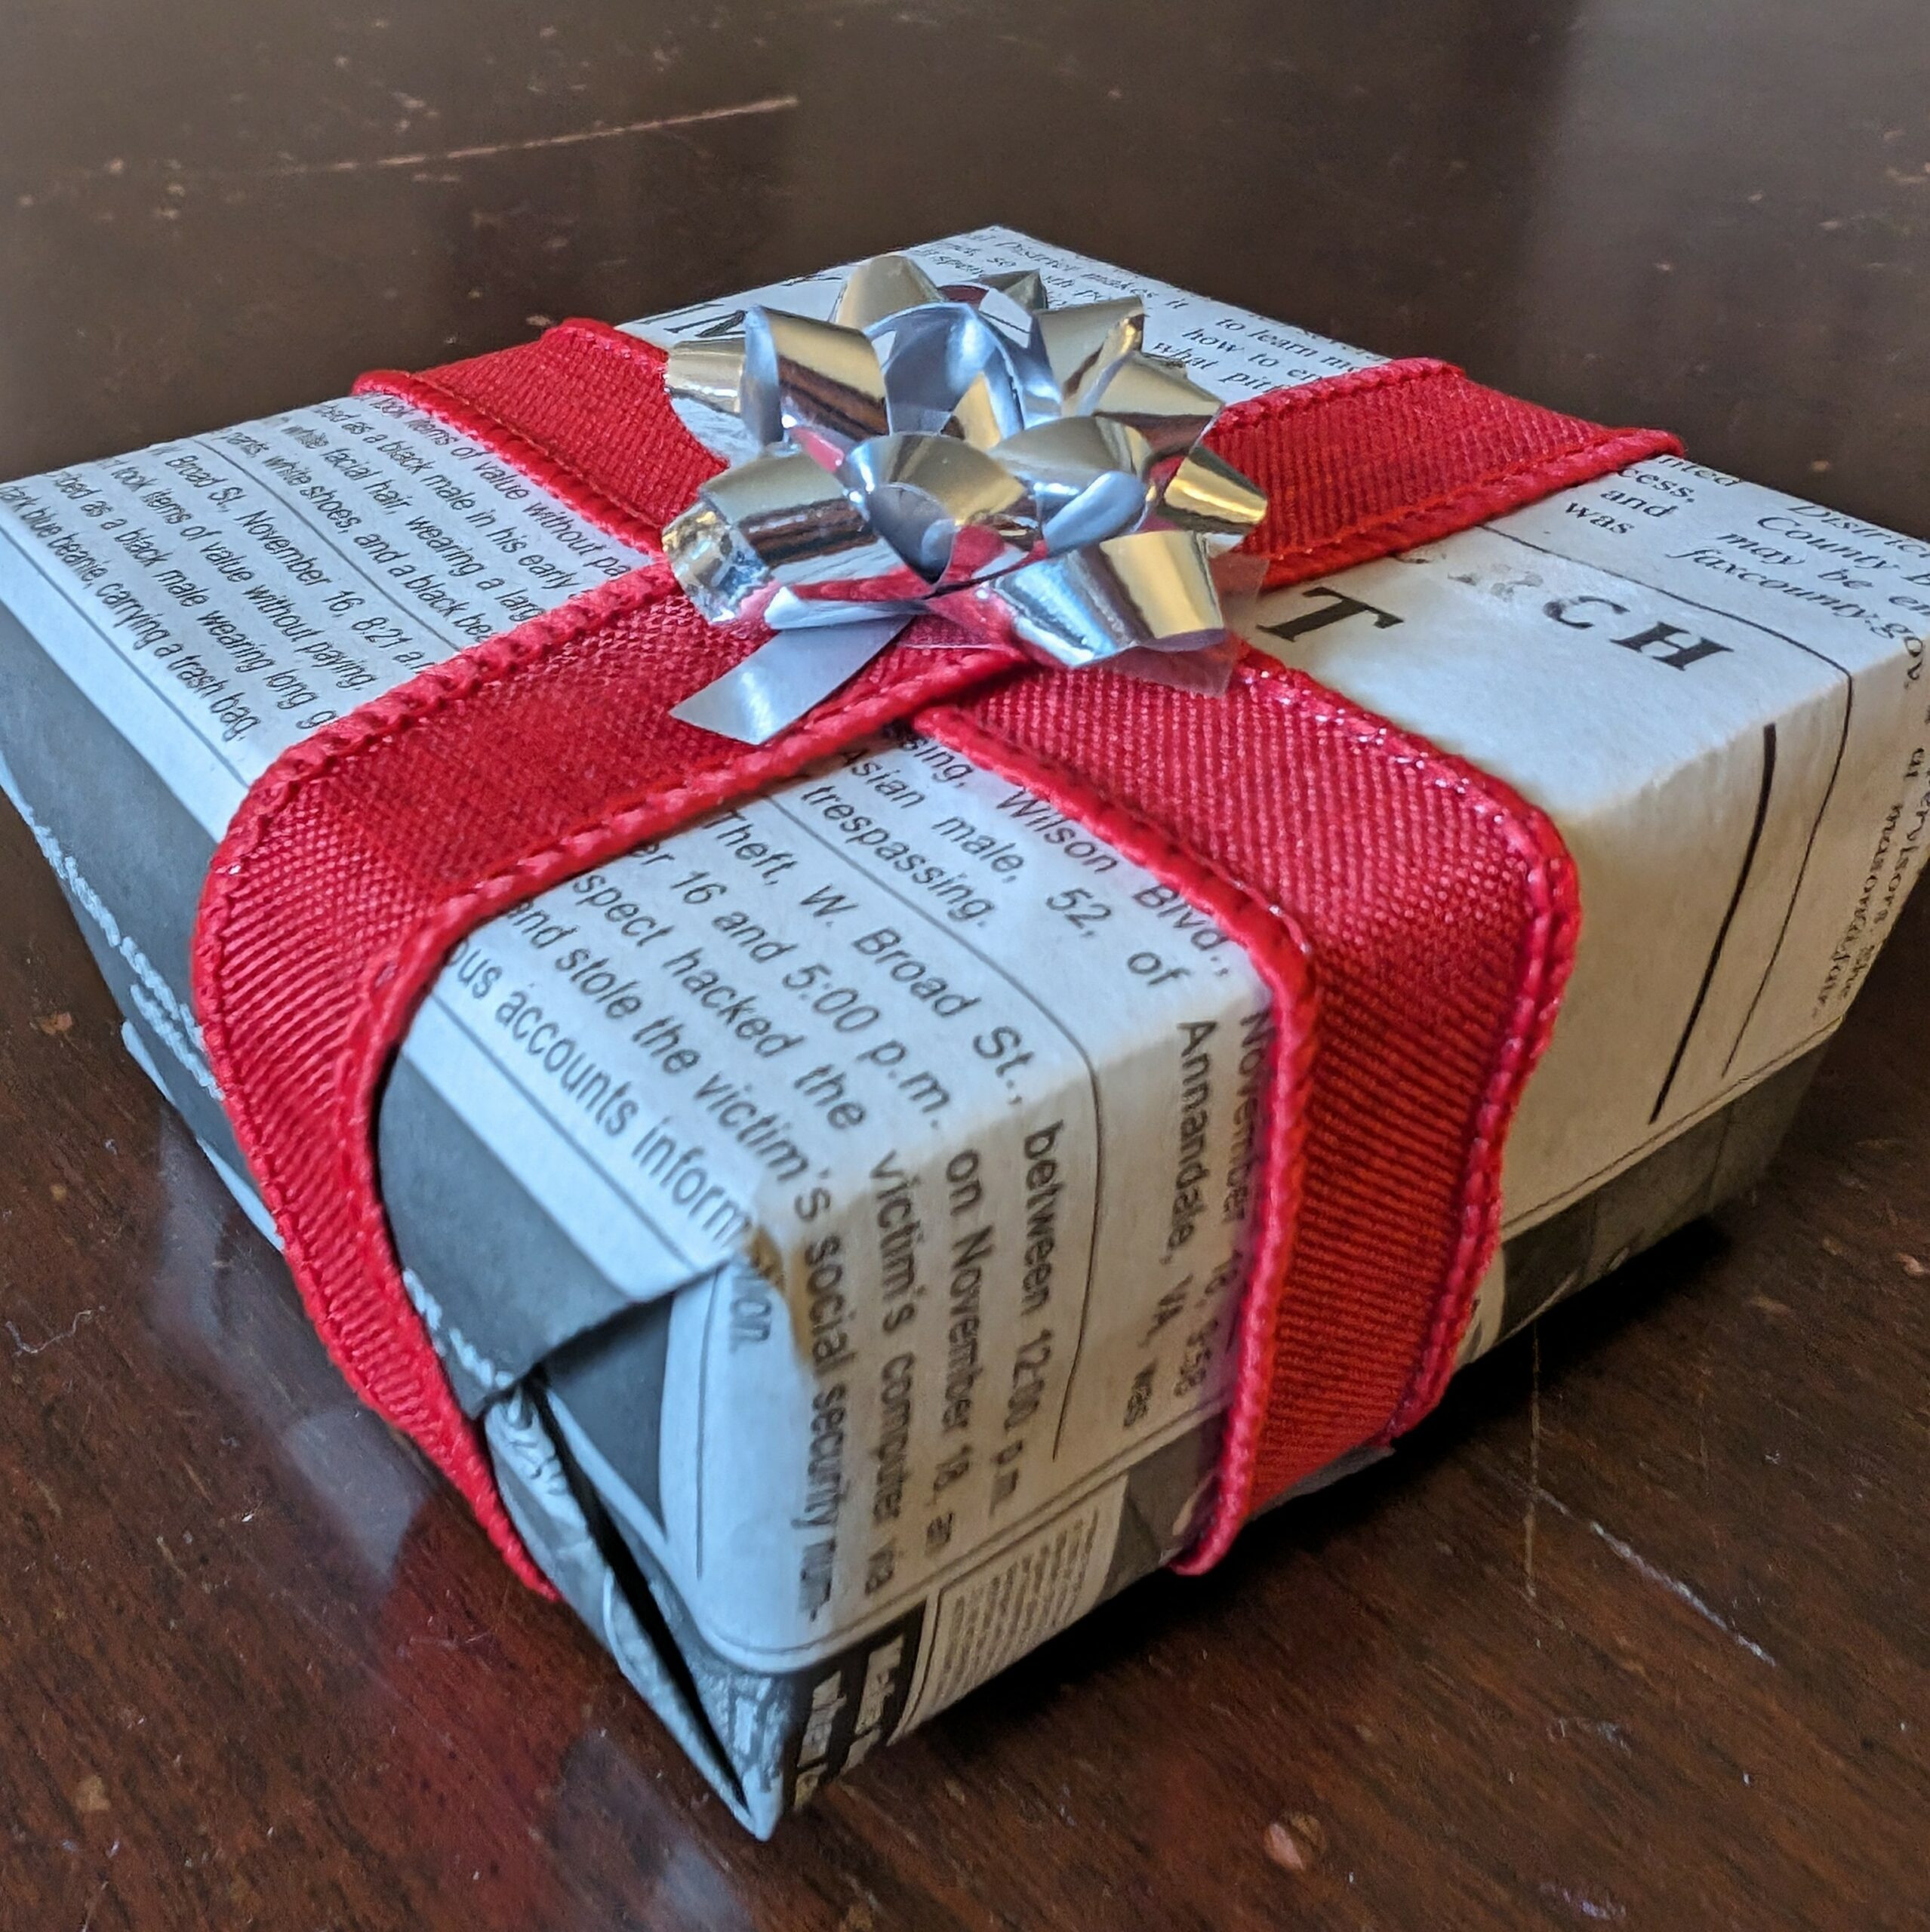 A present wrapped in newspaper.